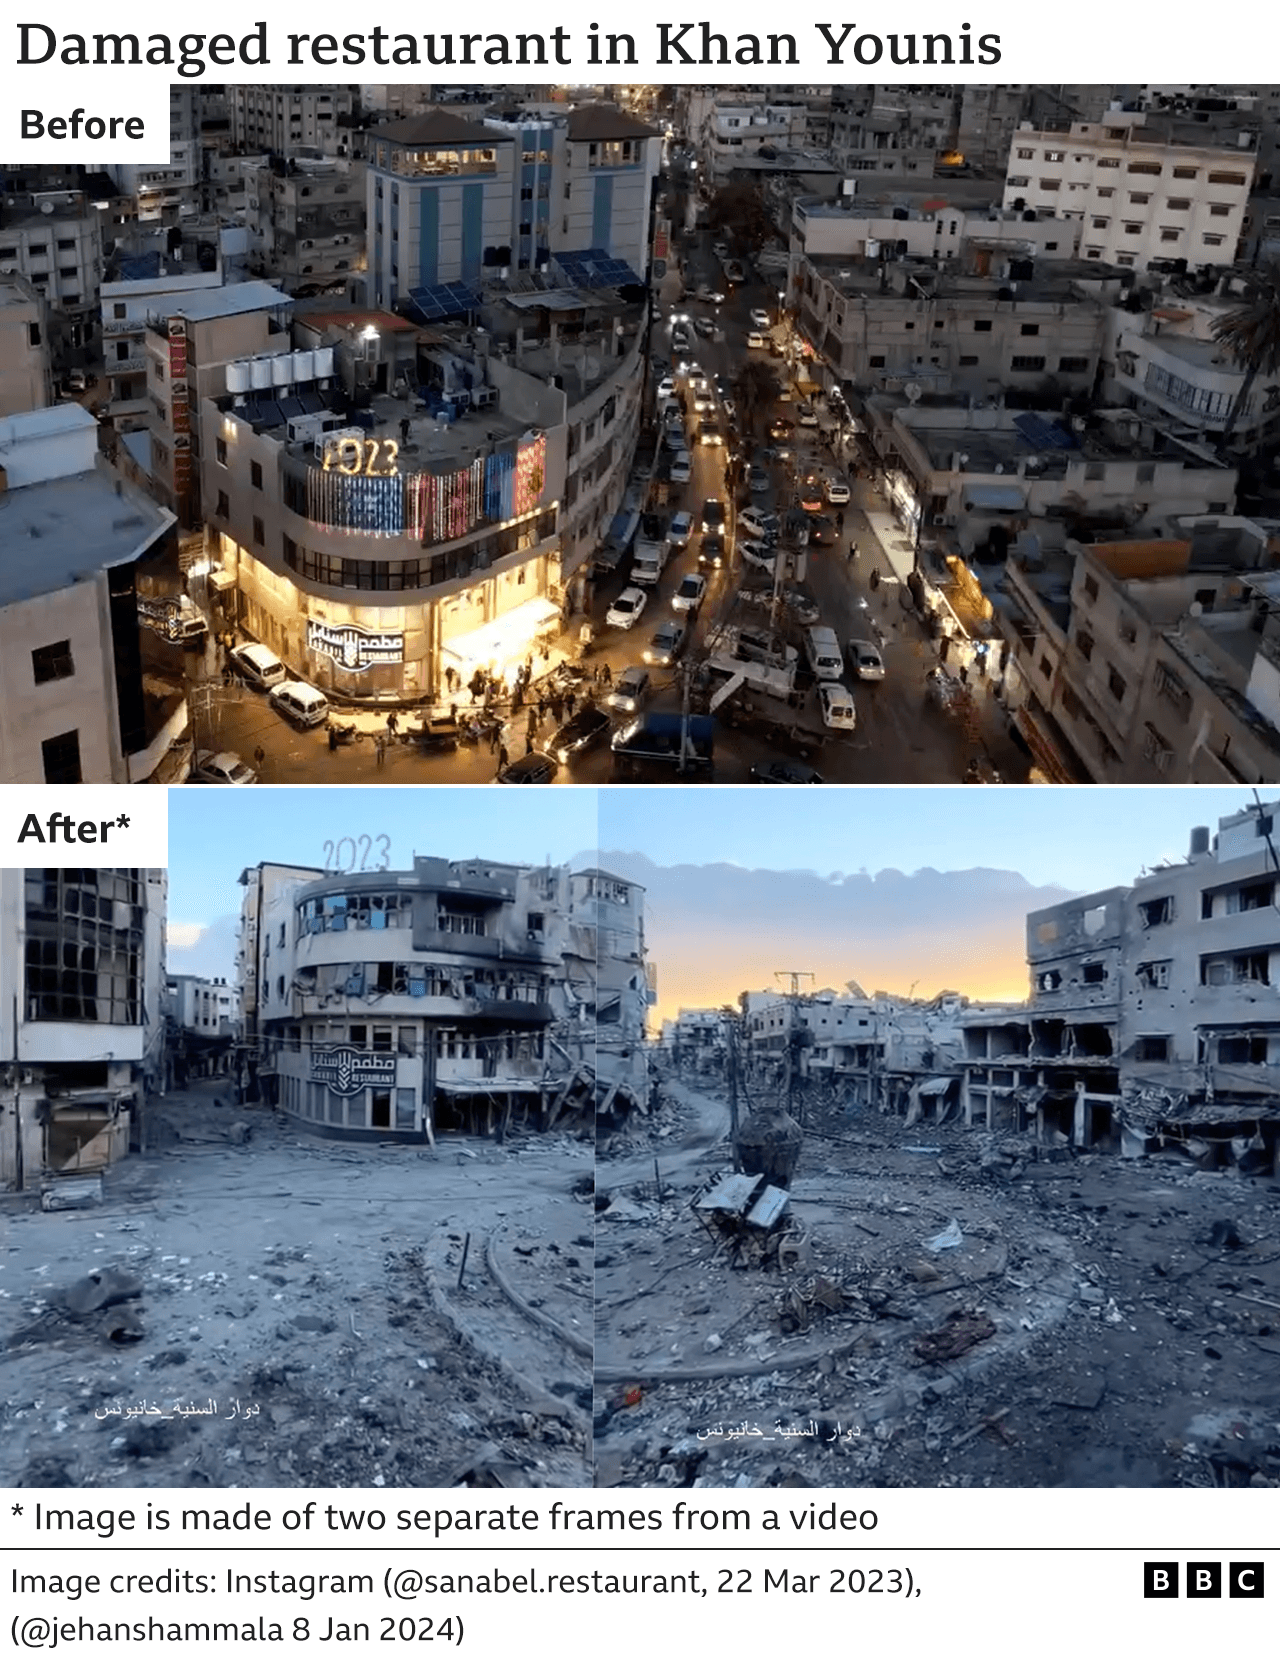 An image showing a restaurant in Khan Younis before the Israeli invasion and another showing the same restaurant surrounded by destroyed or badly damaged buildings in January